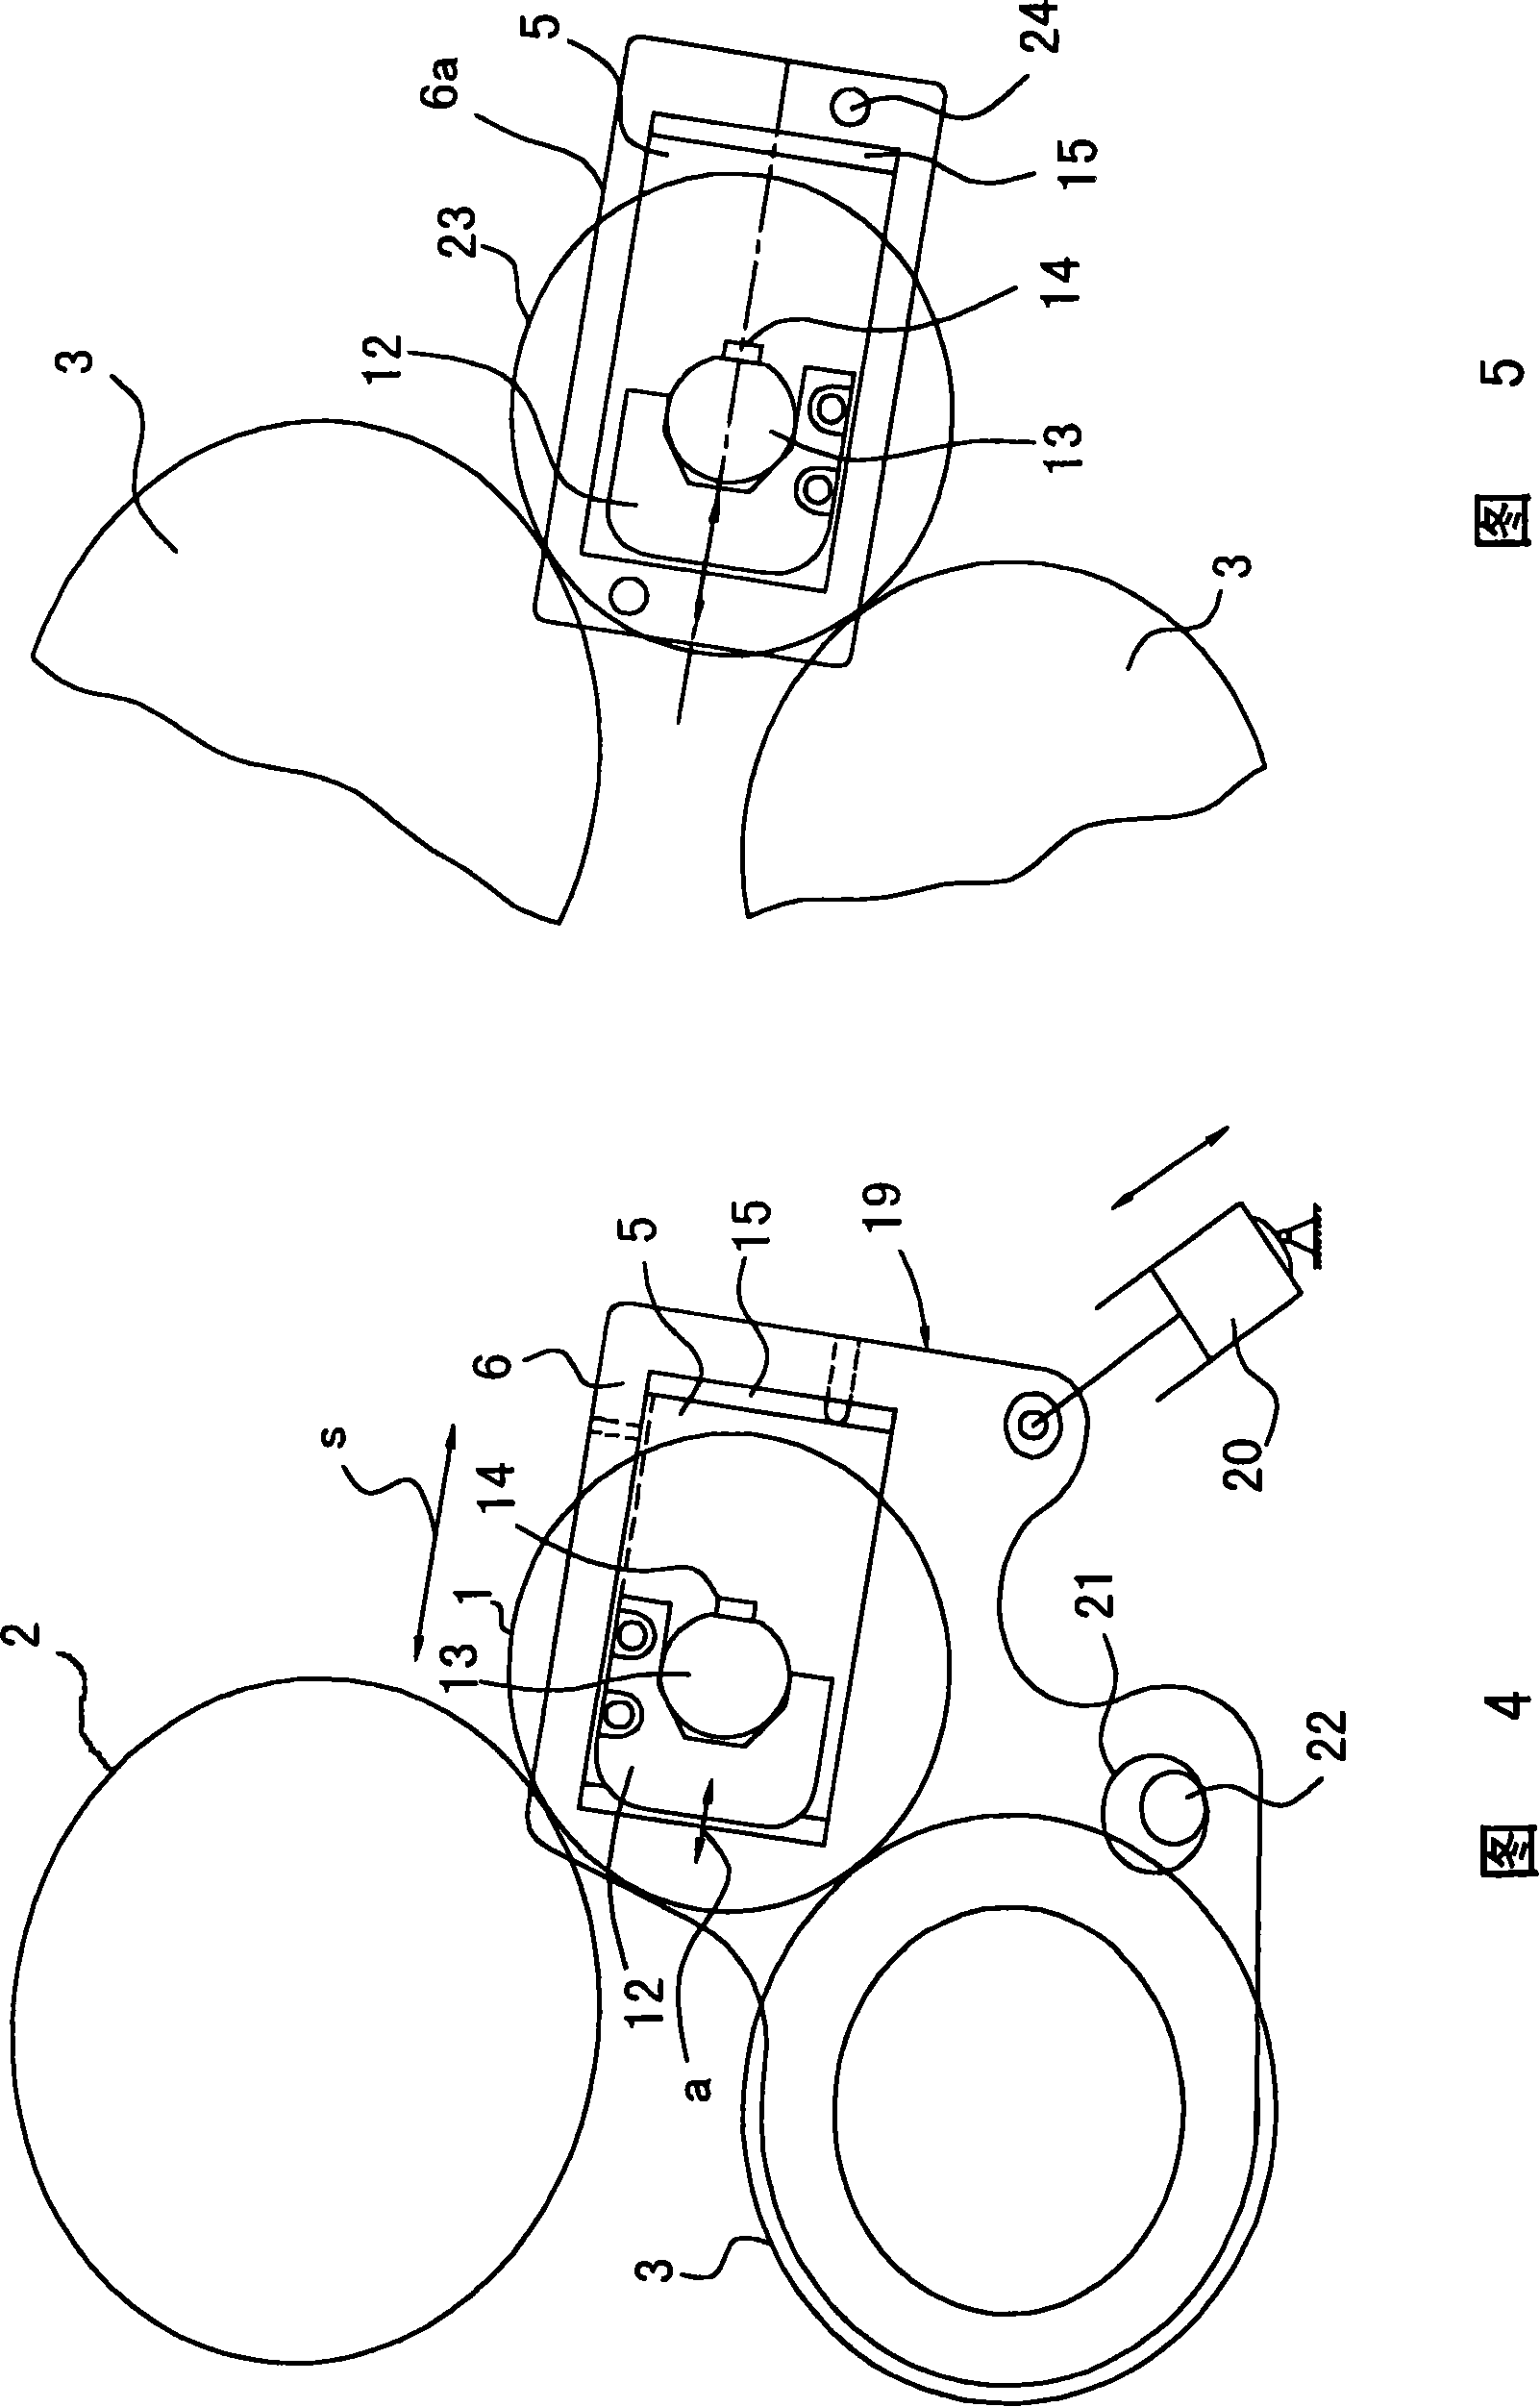 Roller pressing device